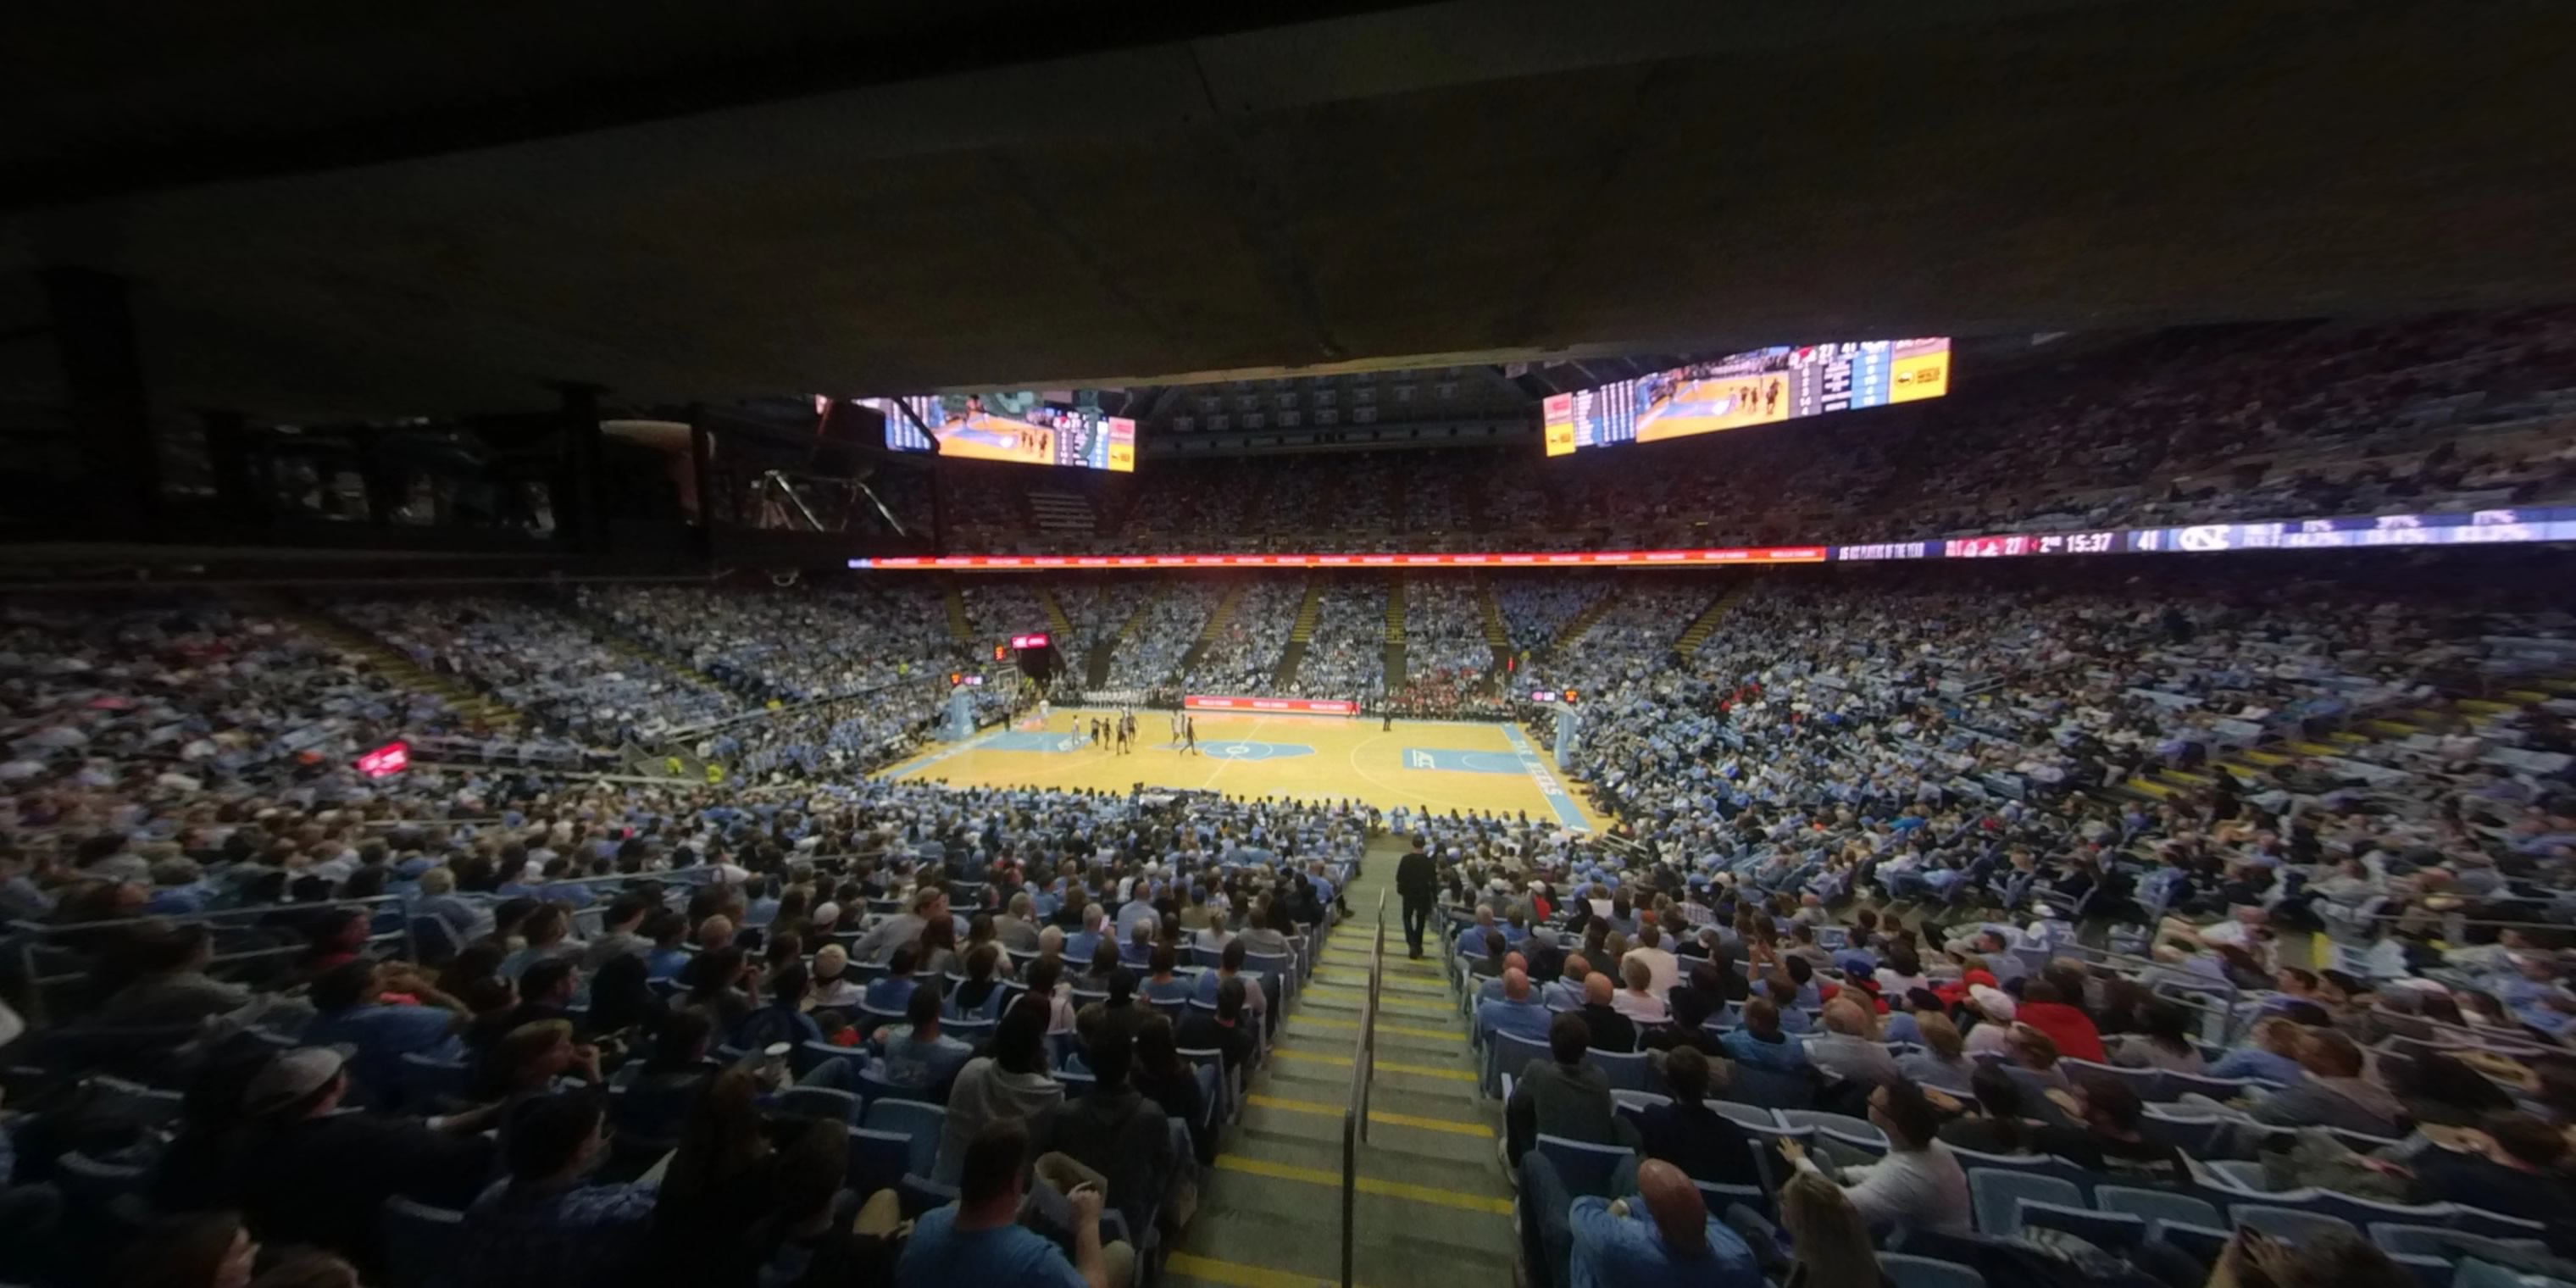 section 126 panoramic seat view  - dean smith center